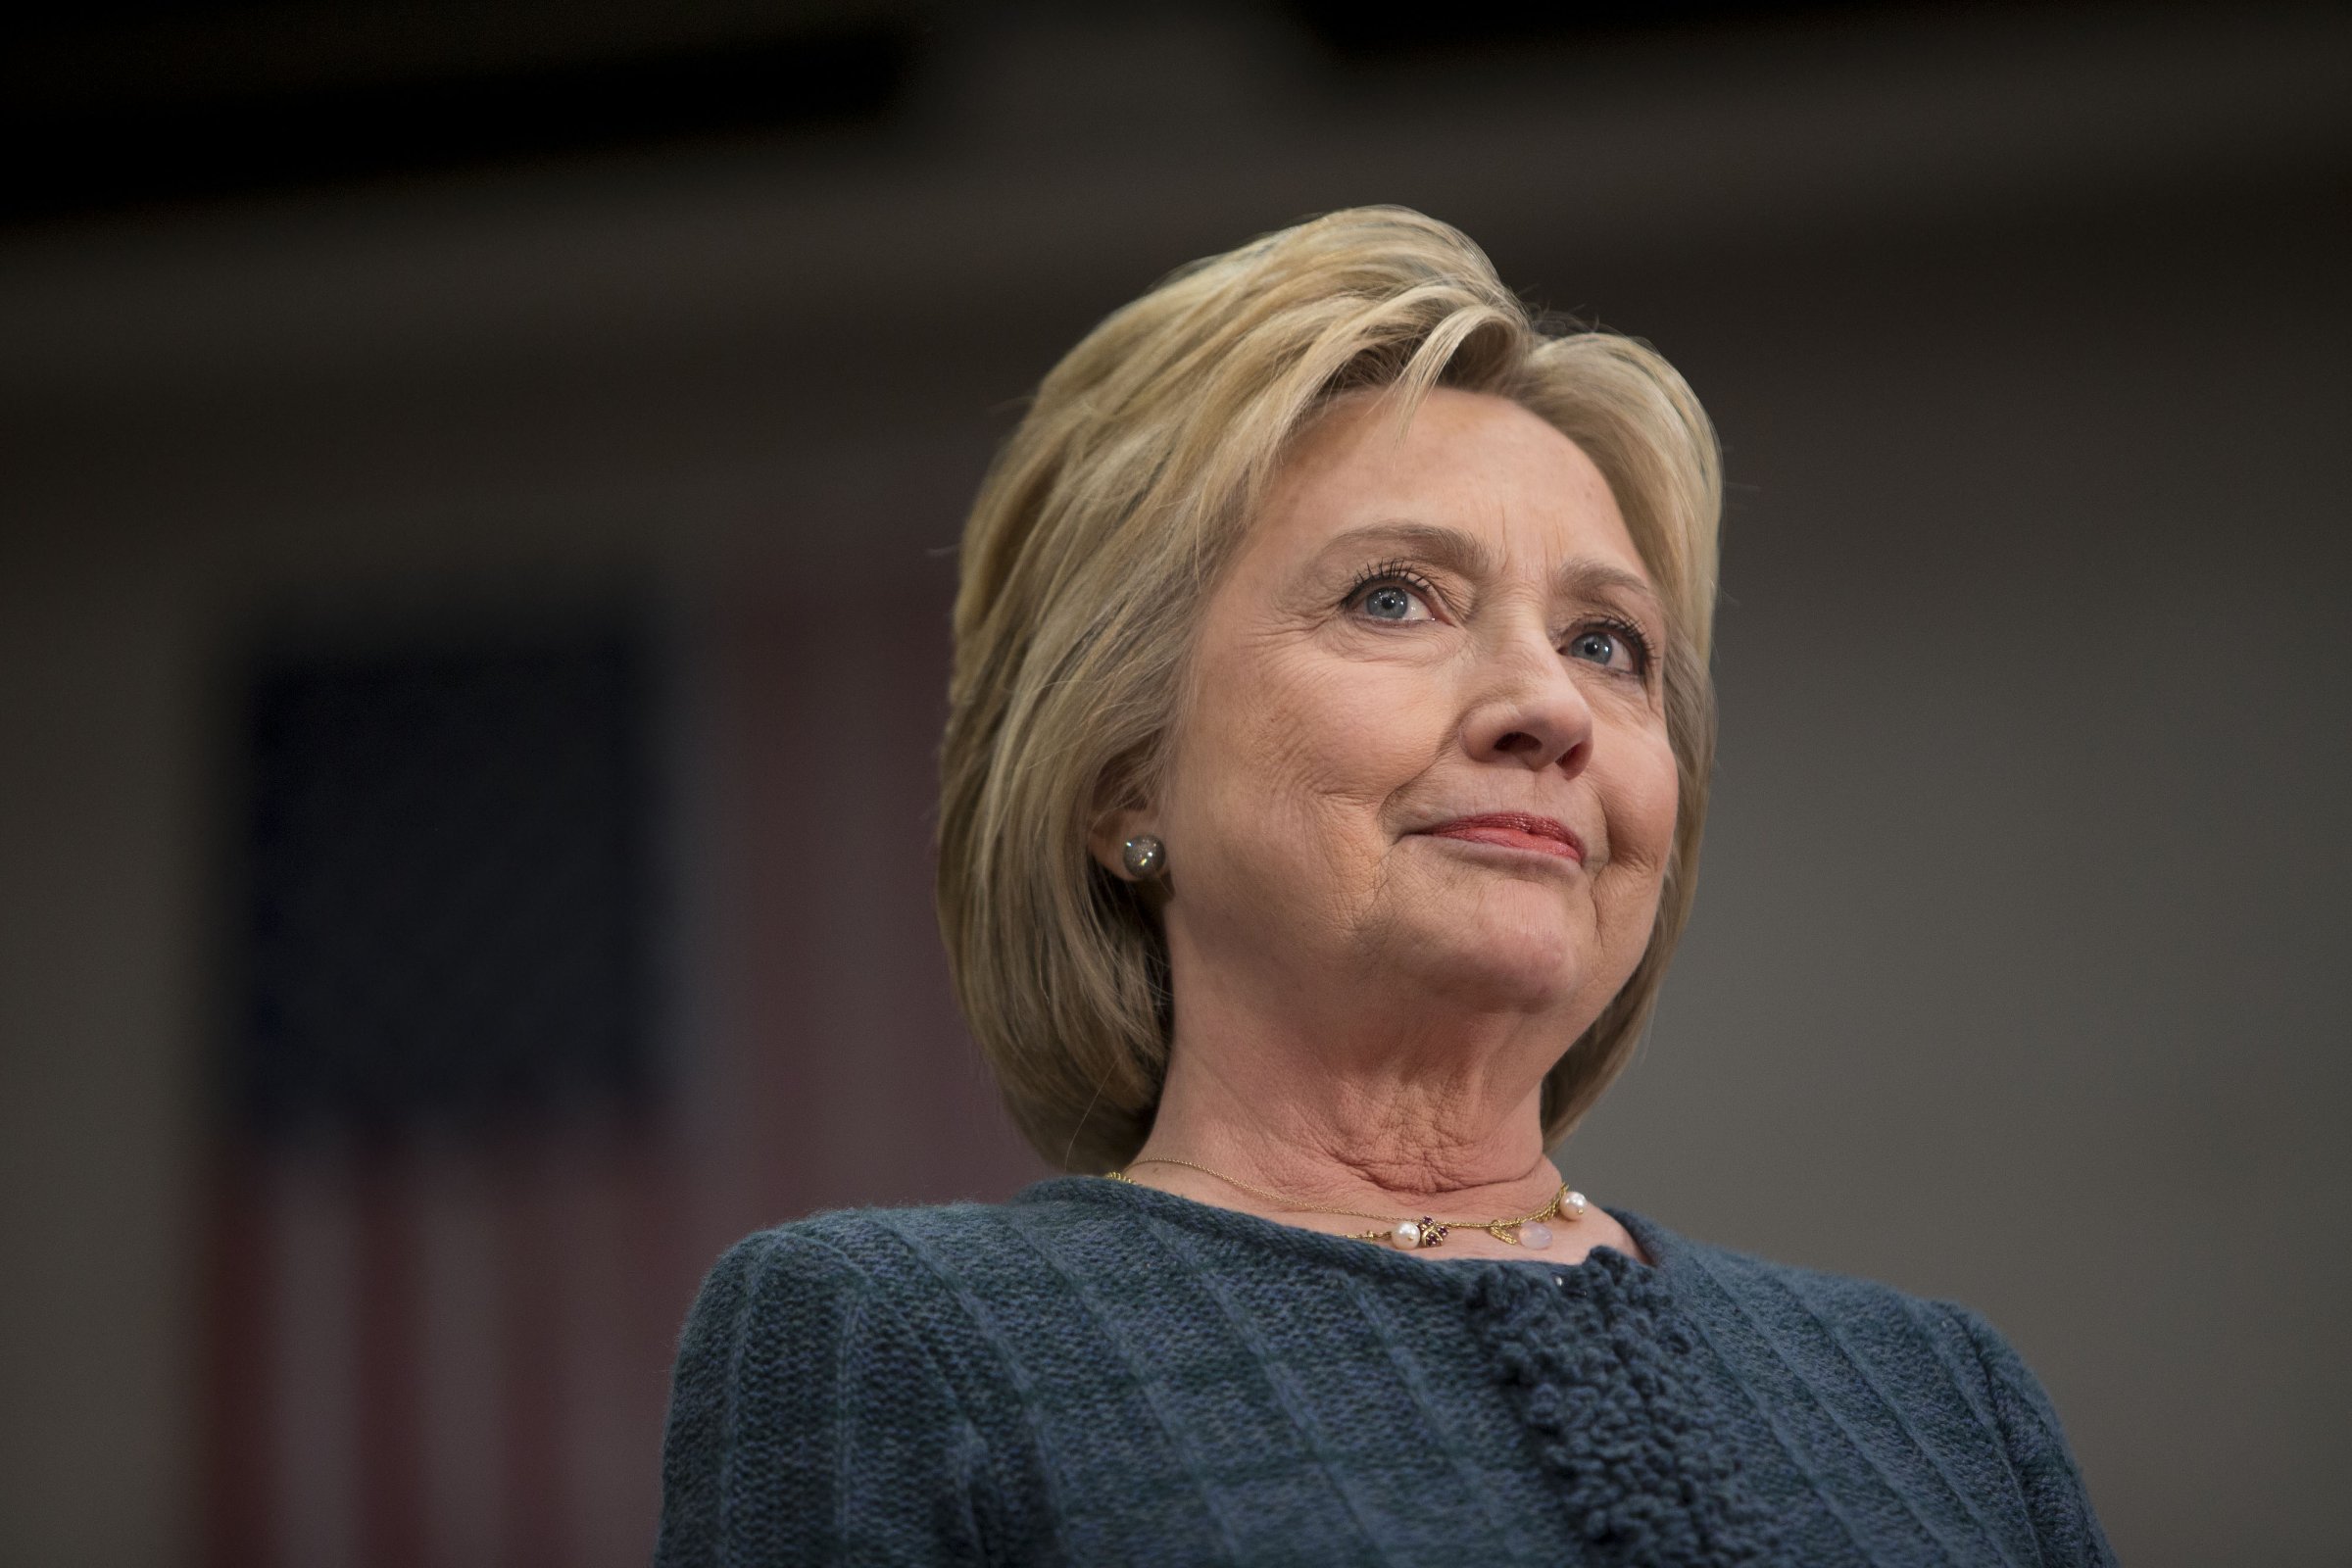 Hillary Clinton at a campaign event in Concord, N.H. on Feb. 6, 2016.